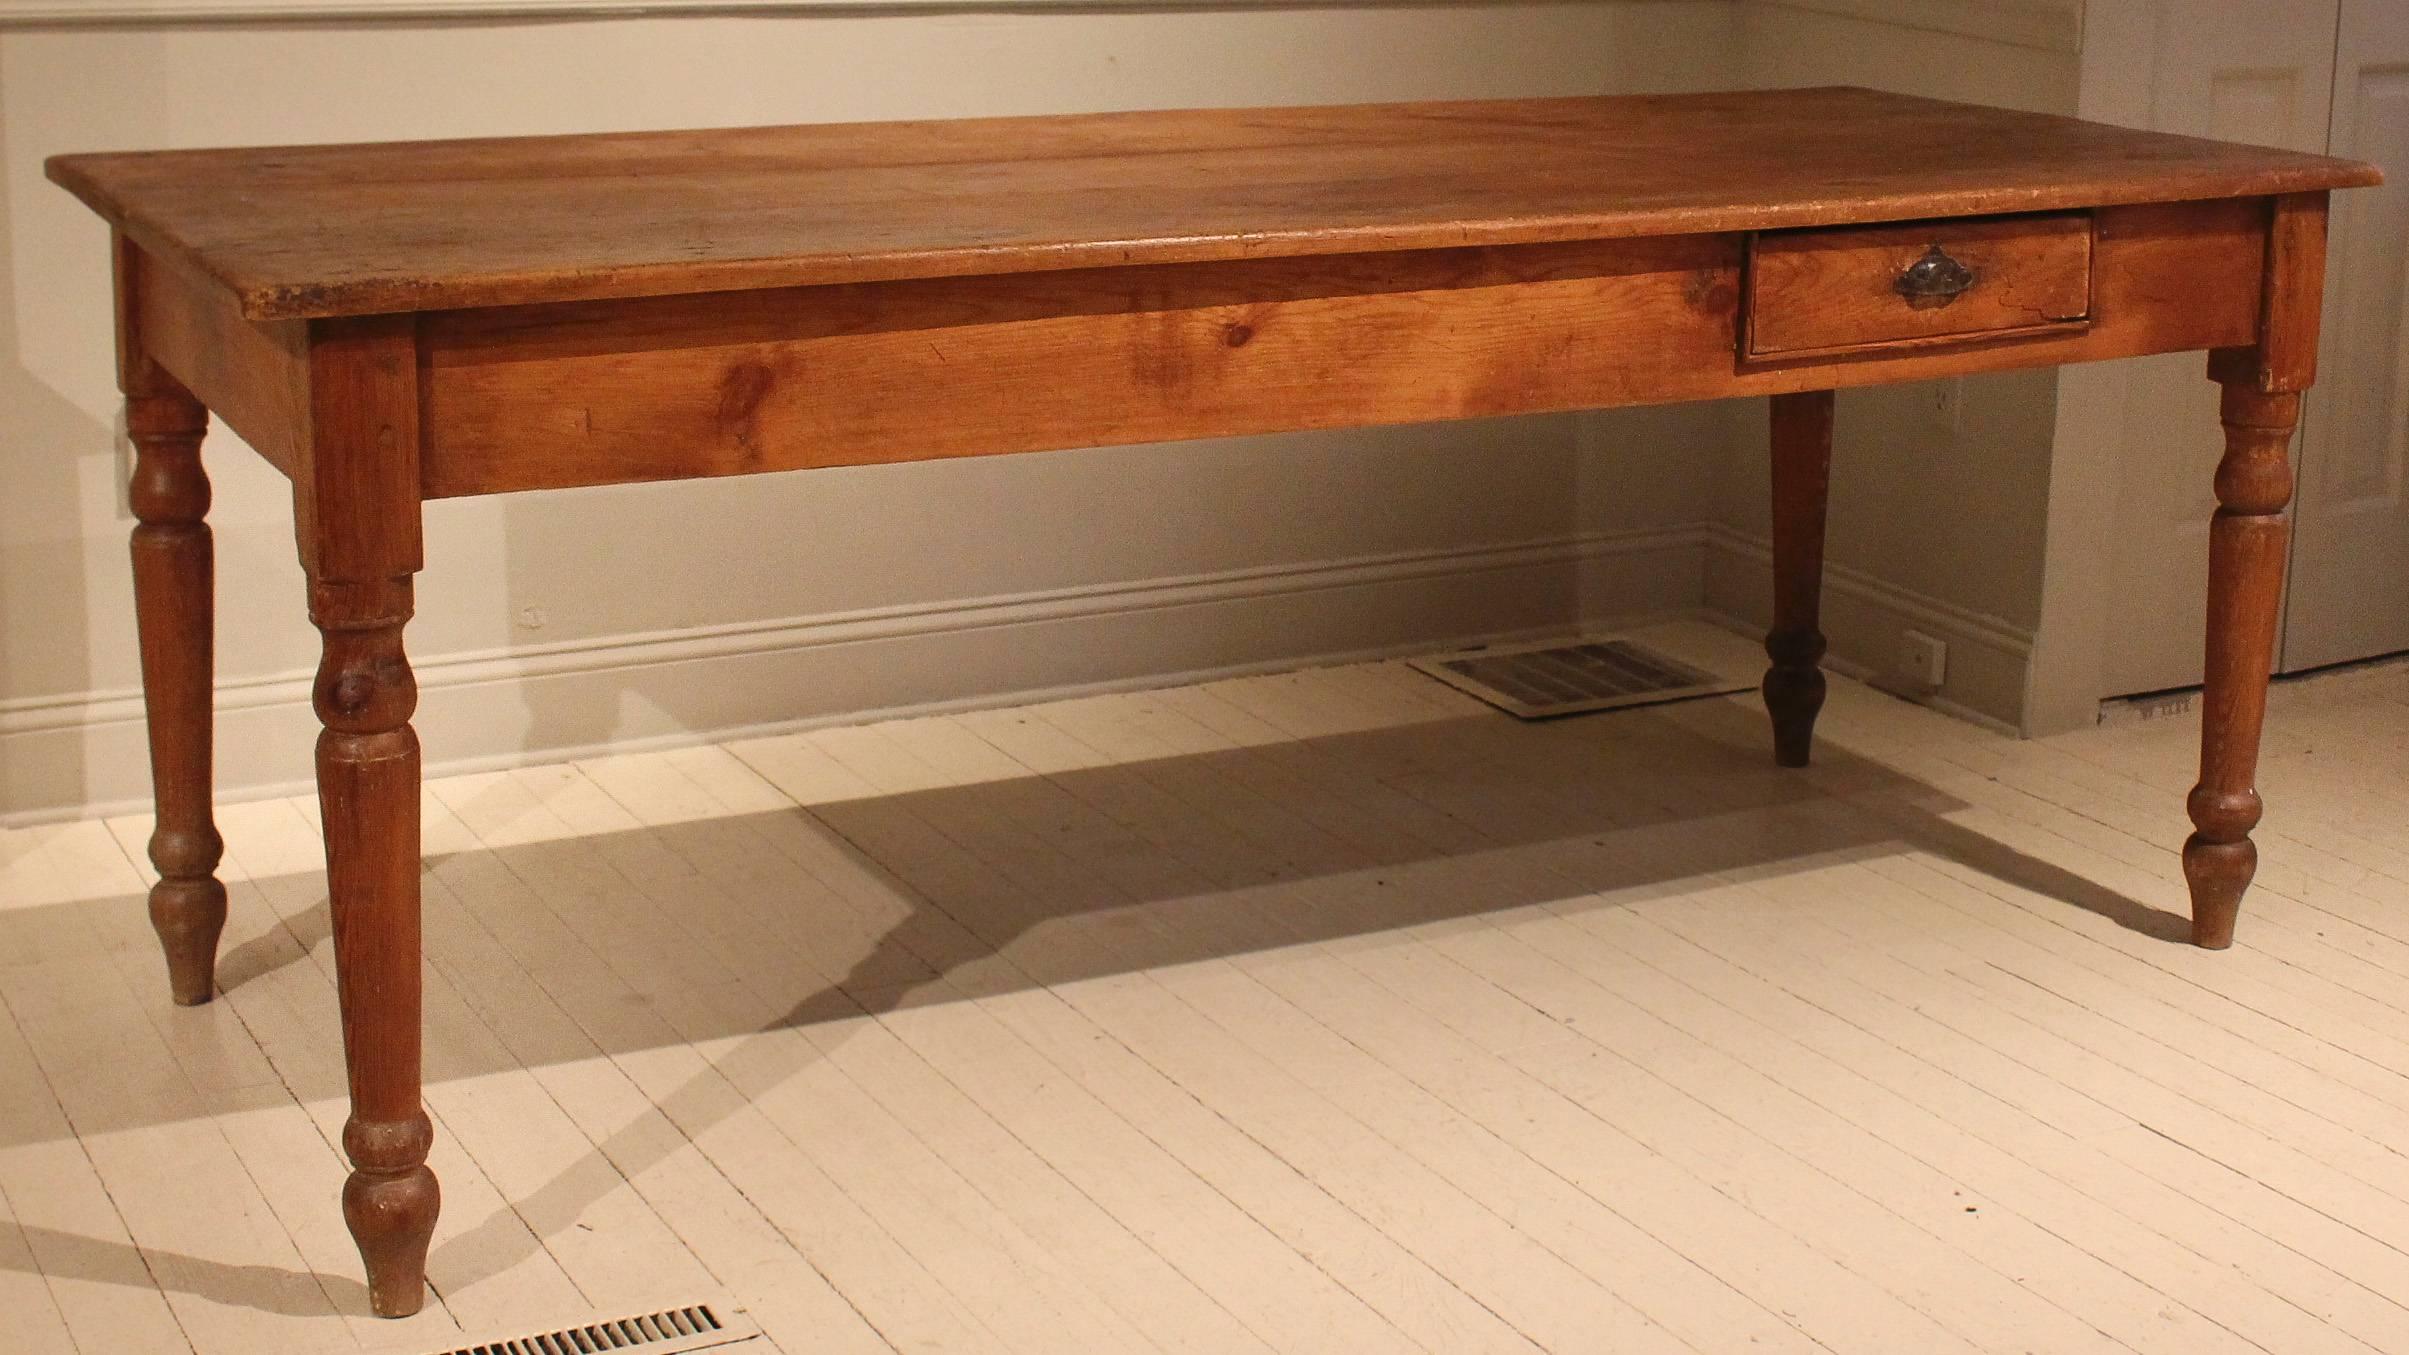 Early 20th century Brazilian work table with triple plank top and single drawer tucked into apron. Table, which is raised on turned legs, has a wonderful timeworn patina.